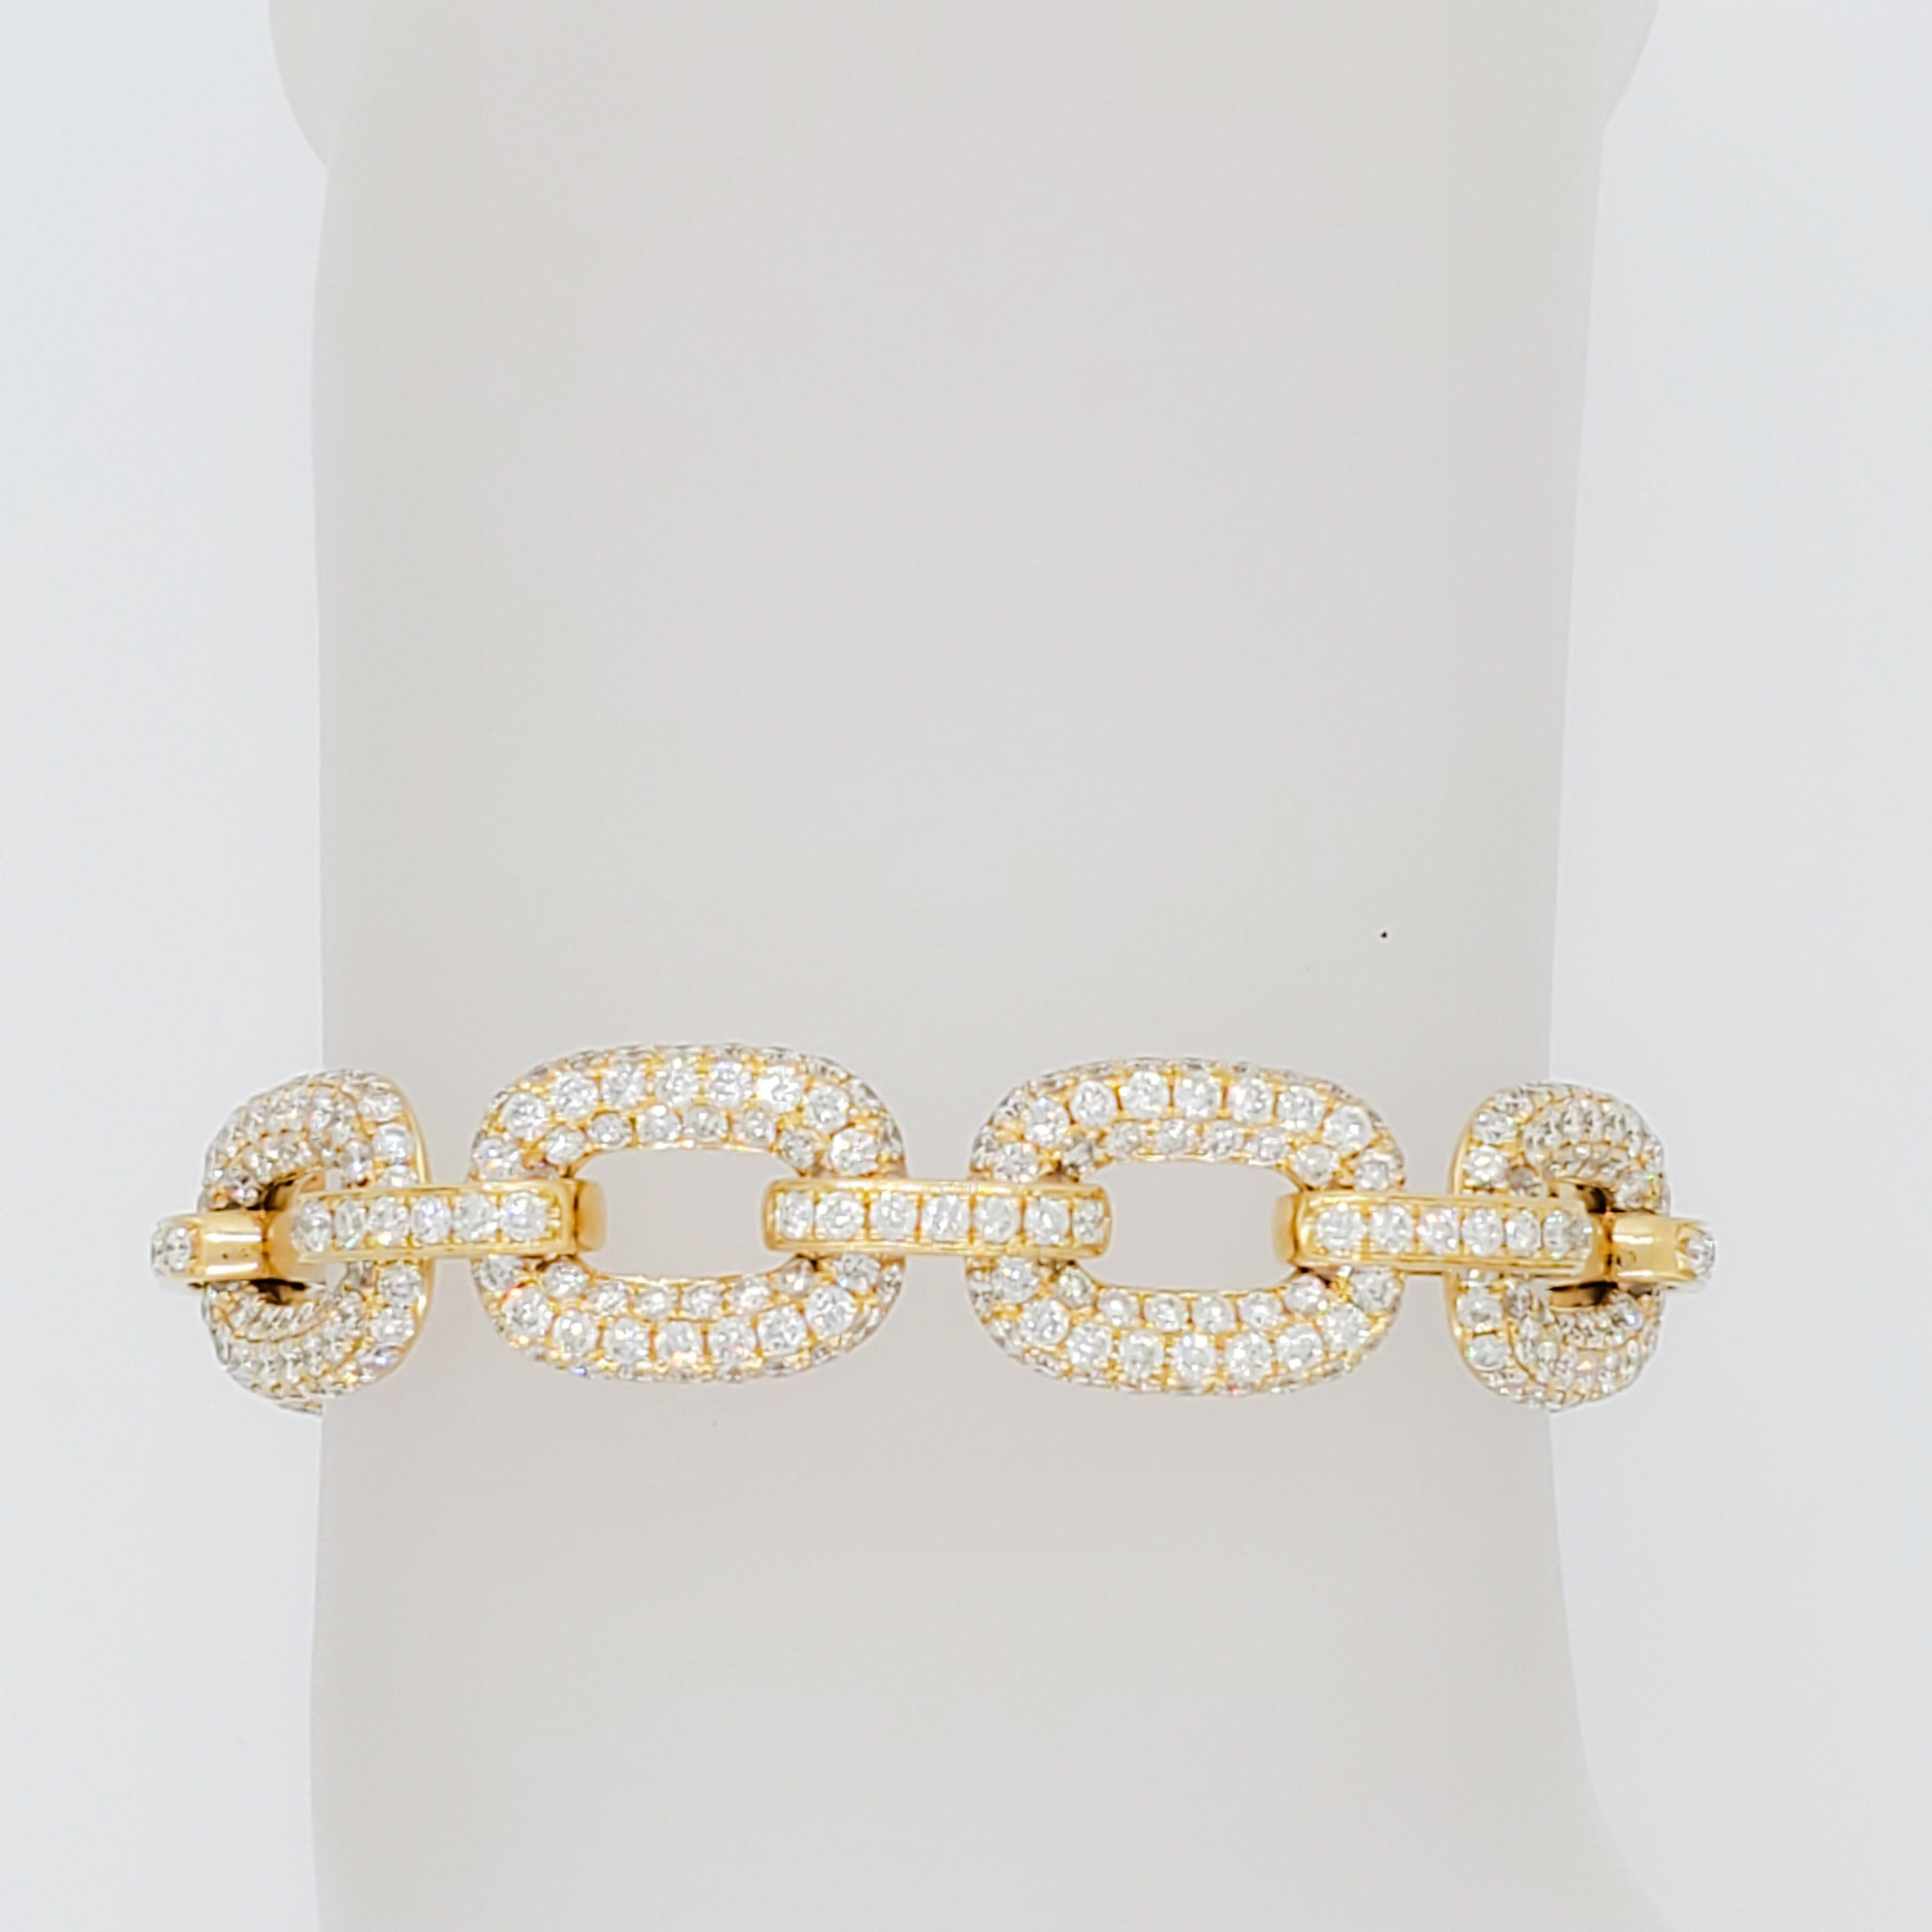 Round Cut White Diamond Pave Link Bracelet in 18k Yellow Gold